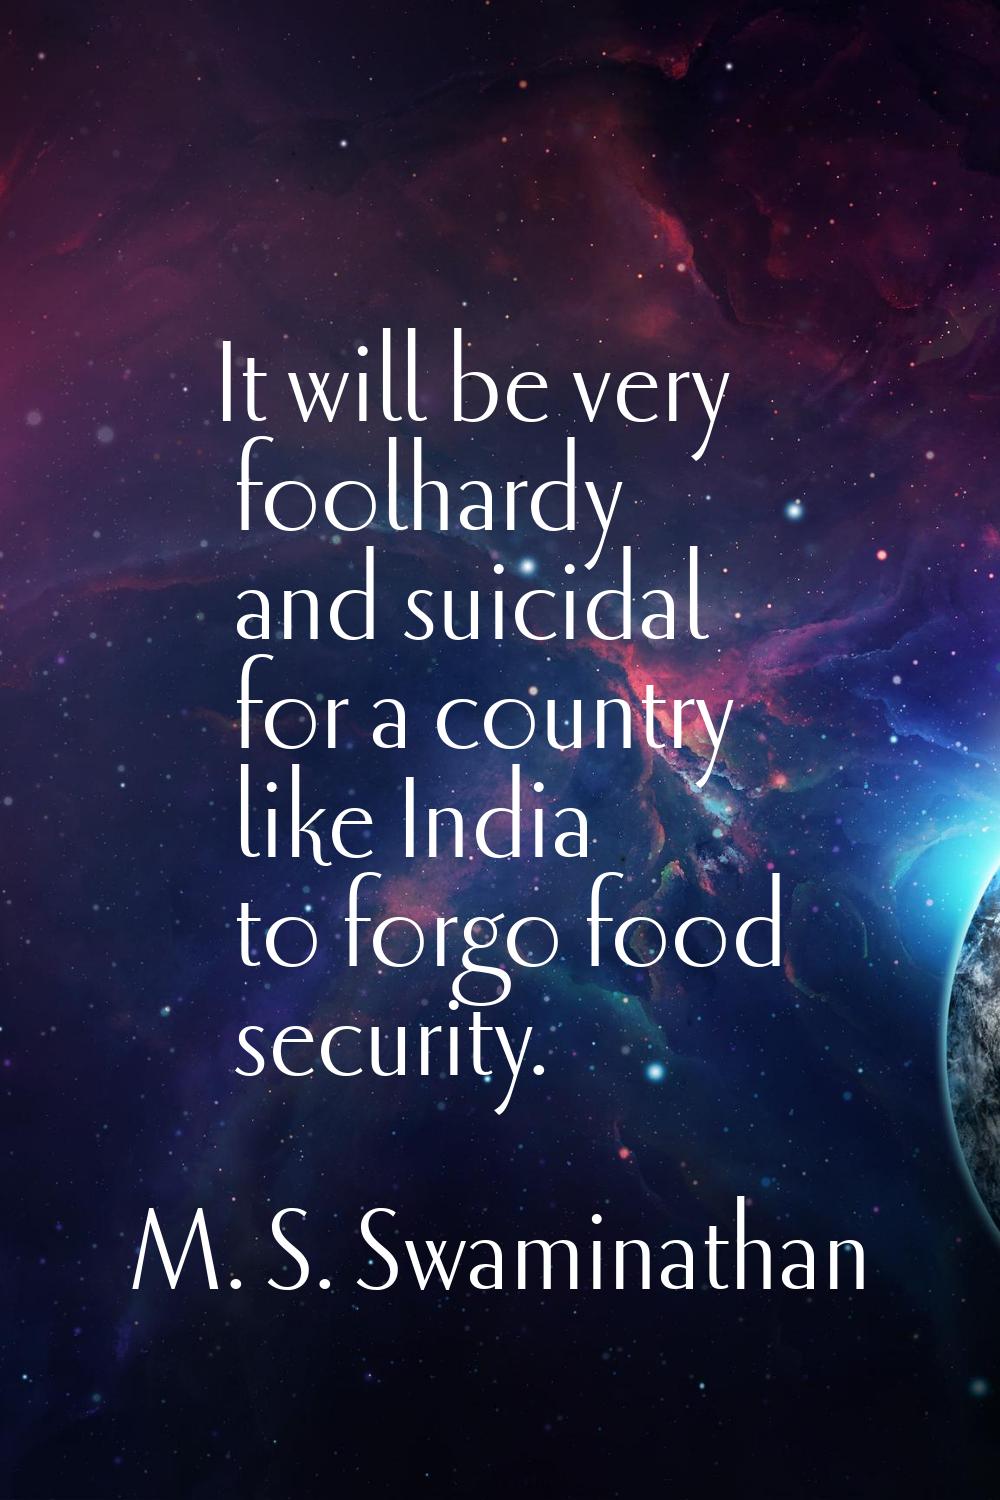 It will be very foolhardy and suicidal for a country like India to forgo food security.